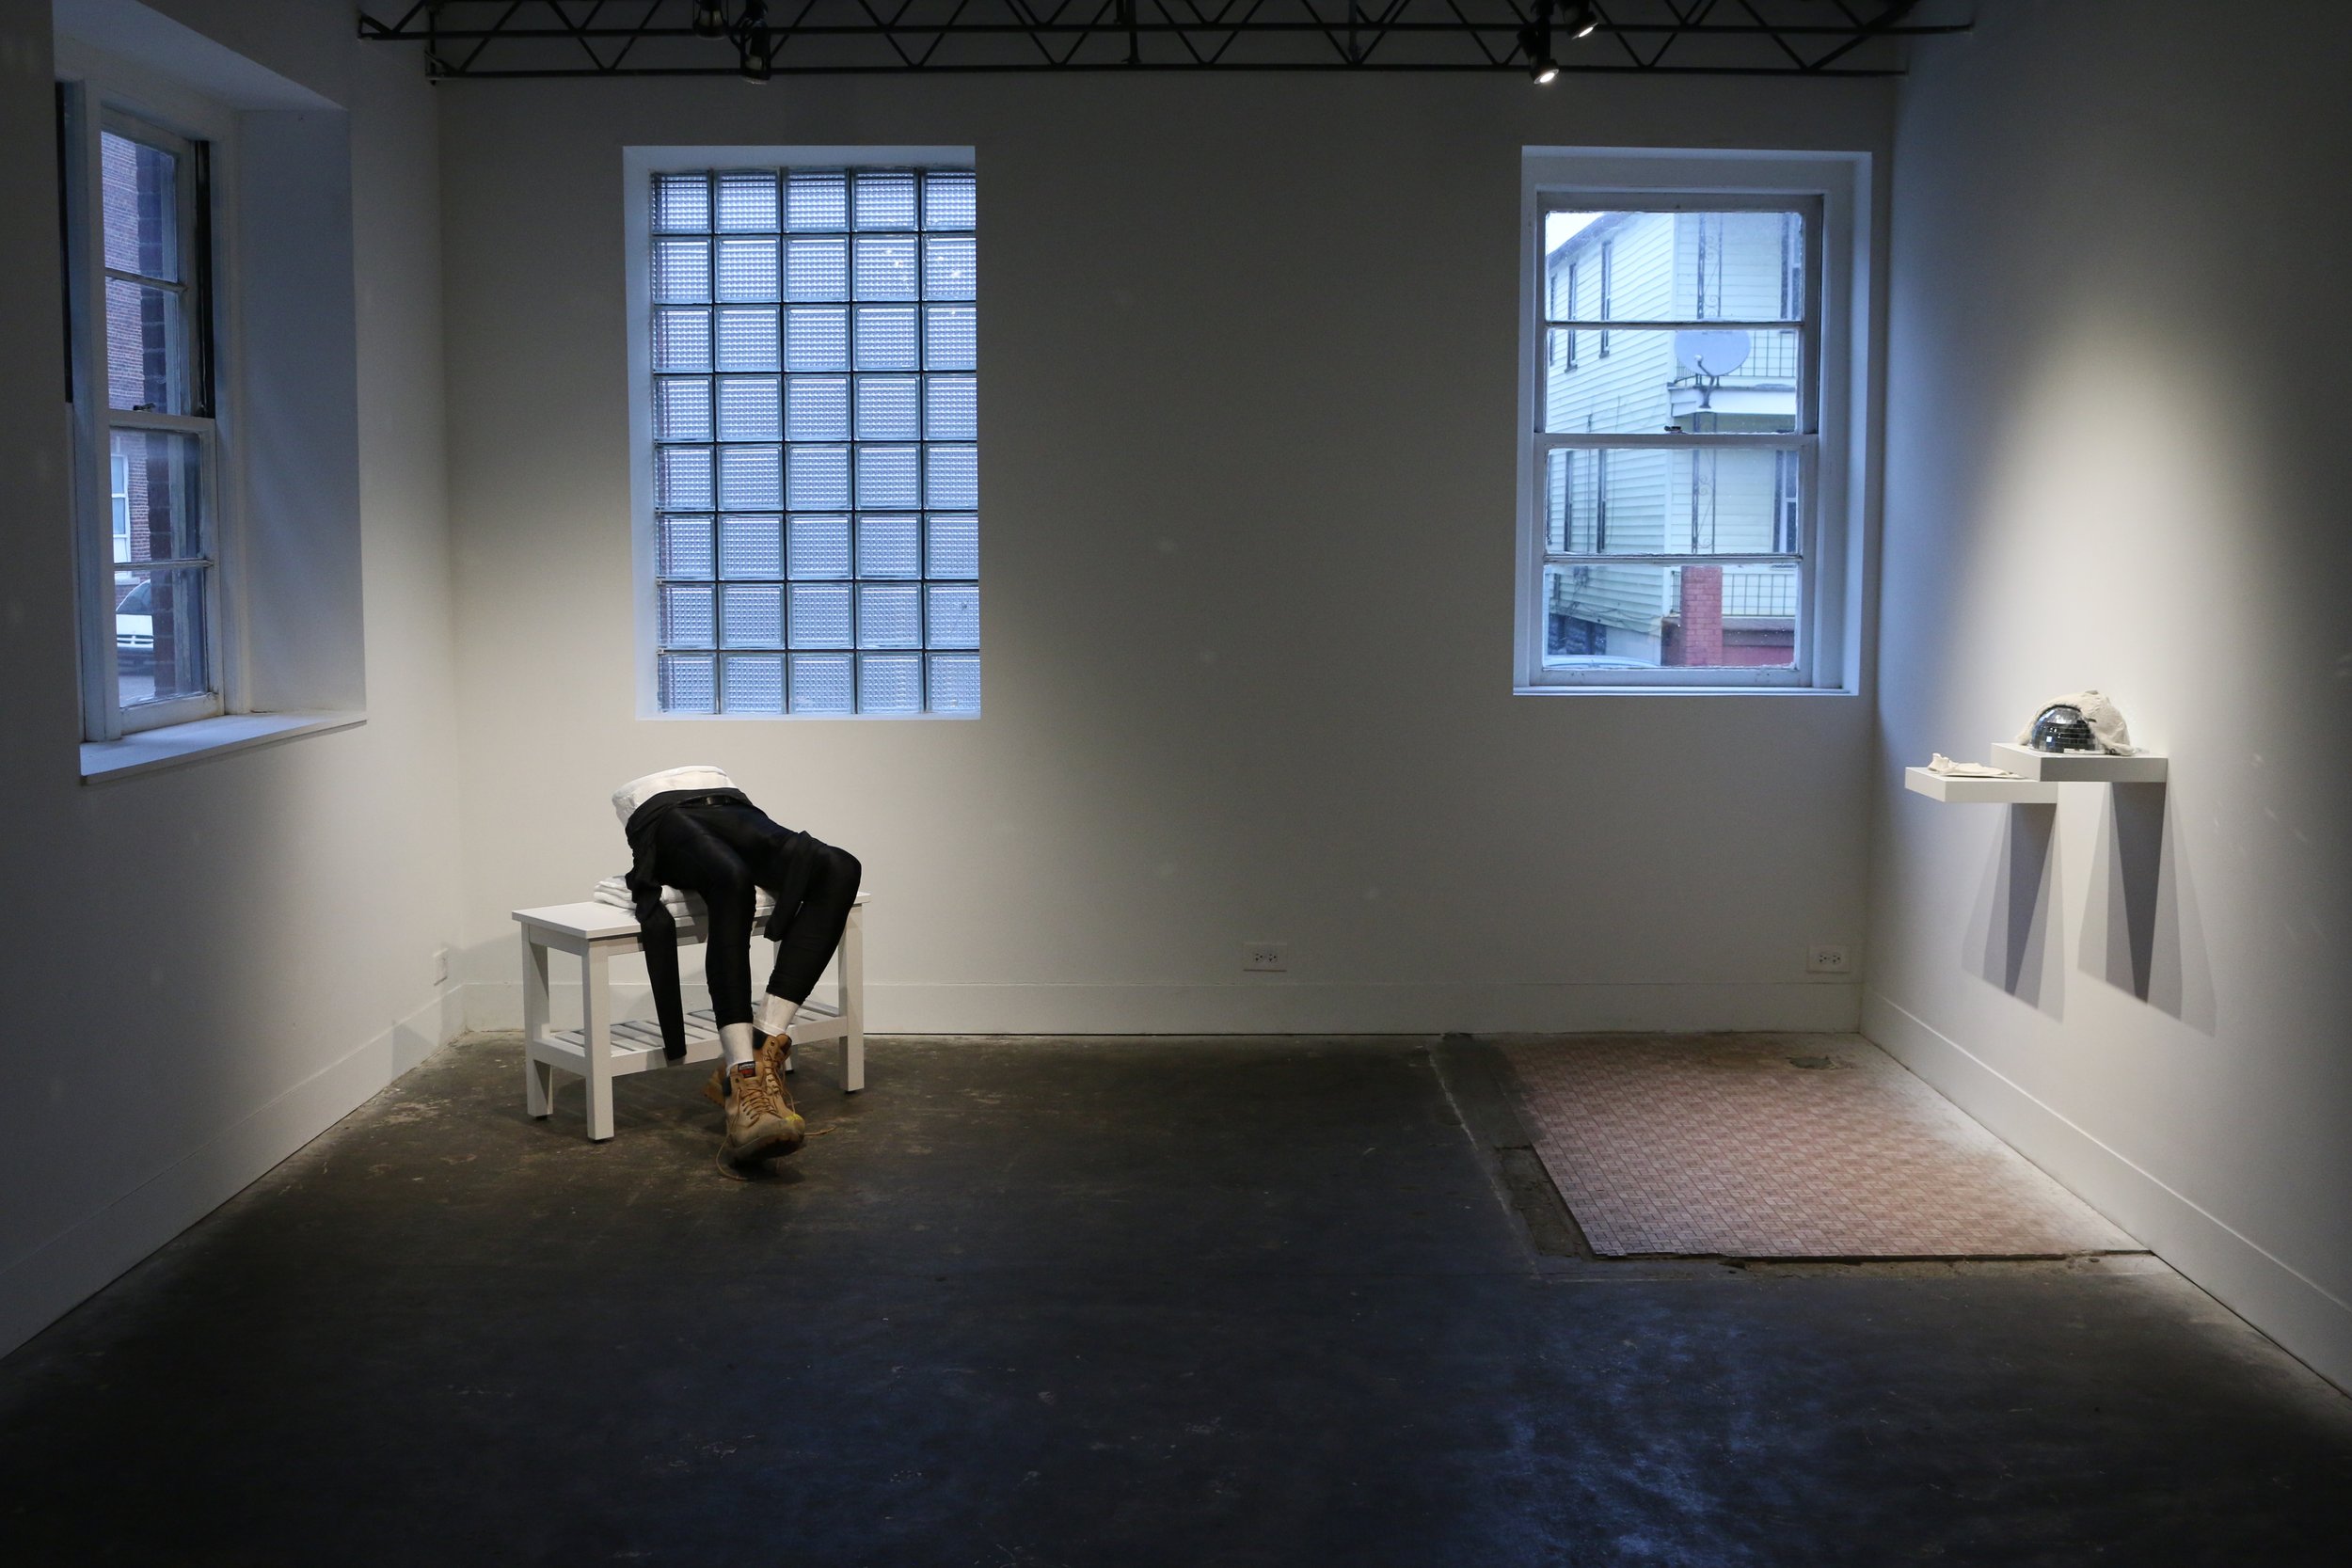 “SHOW ME LOVE” INSTALLATION VIEW